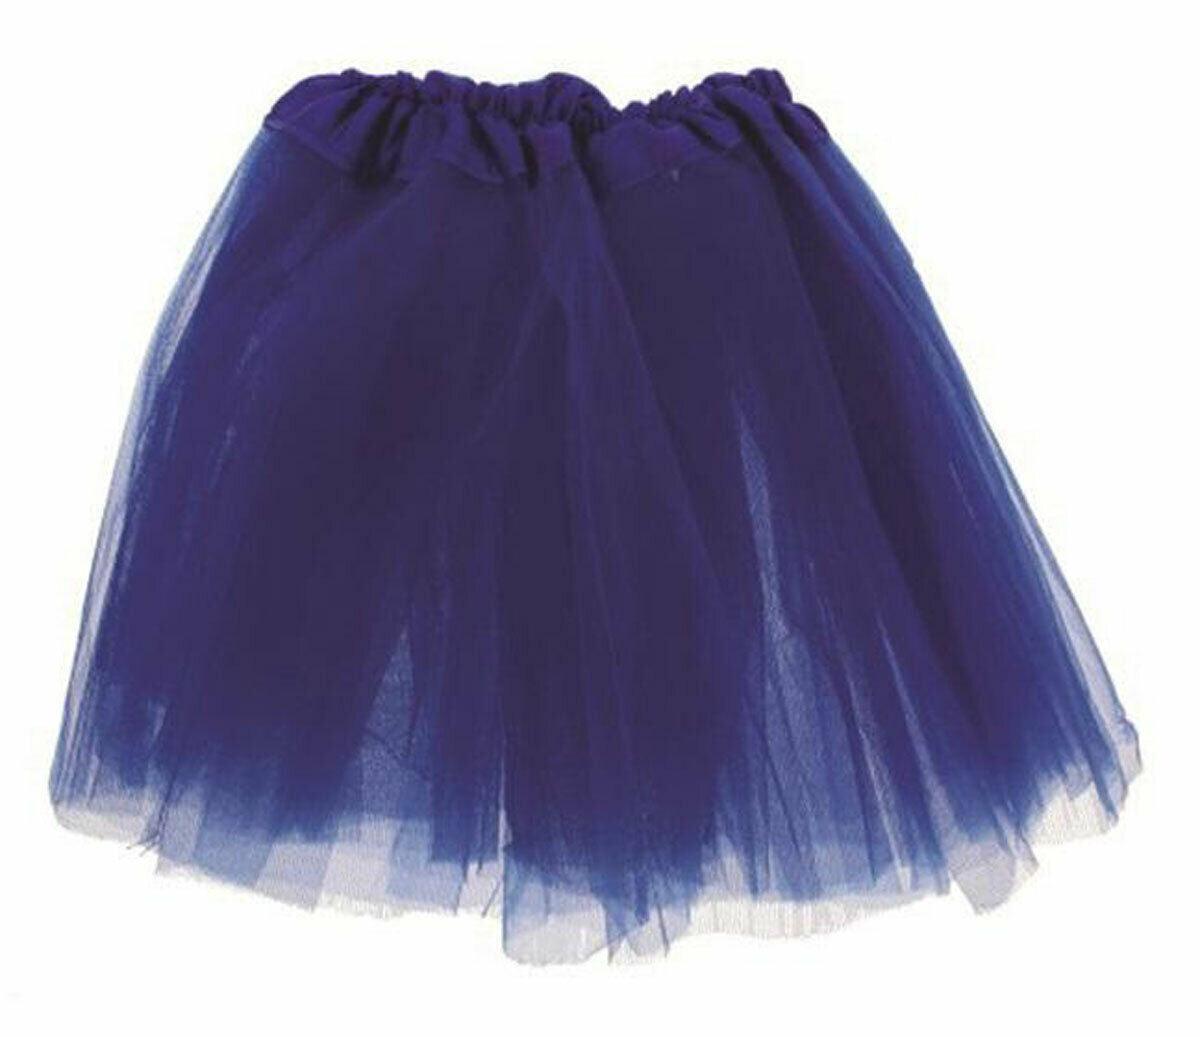 Ladies Girls 2 Layered Tutu Net Skirt with Satin Band 1980’s Party Fancy Dress - Labreeze